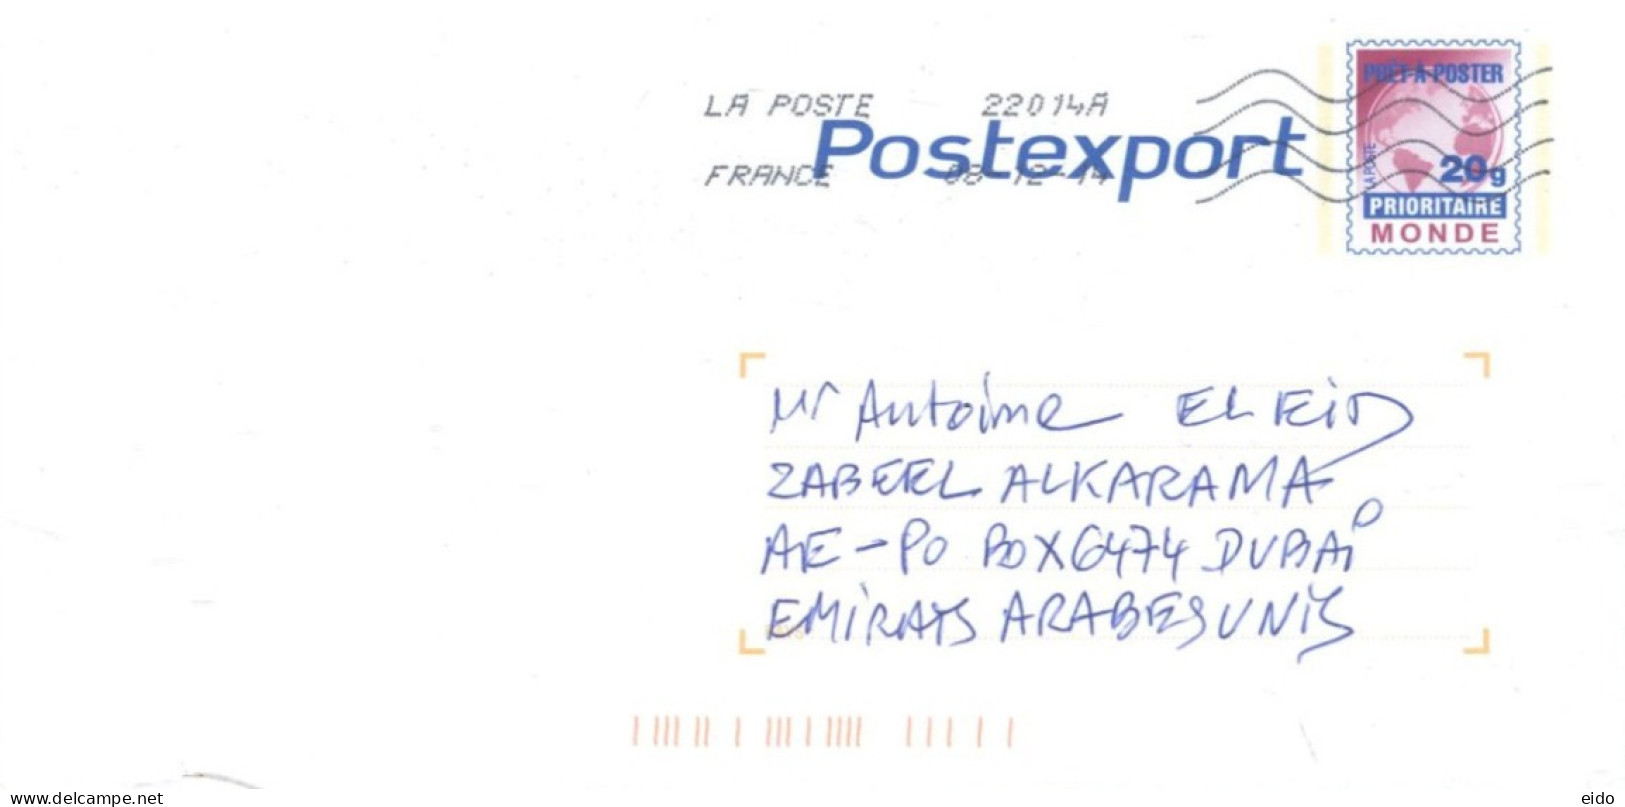 FRANCE - 2014,  POSTAL STAMP SEALED COVER SENT TO DUBAI. - Covers & Documents